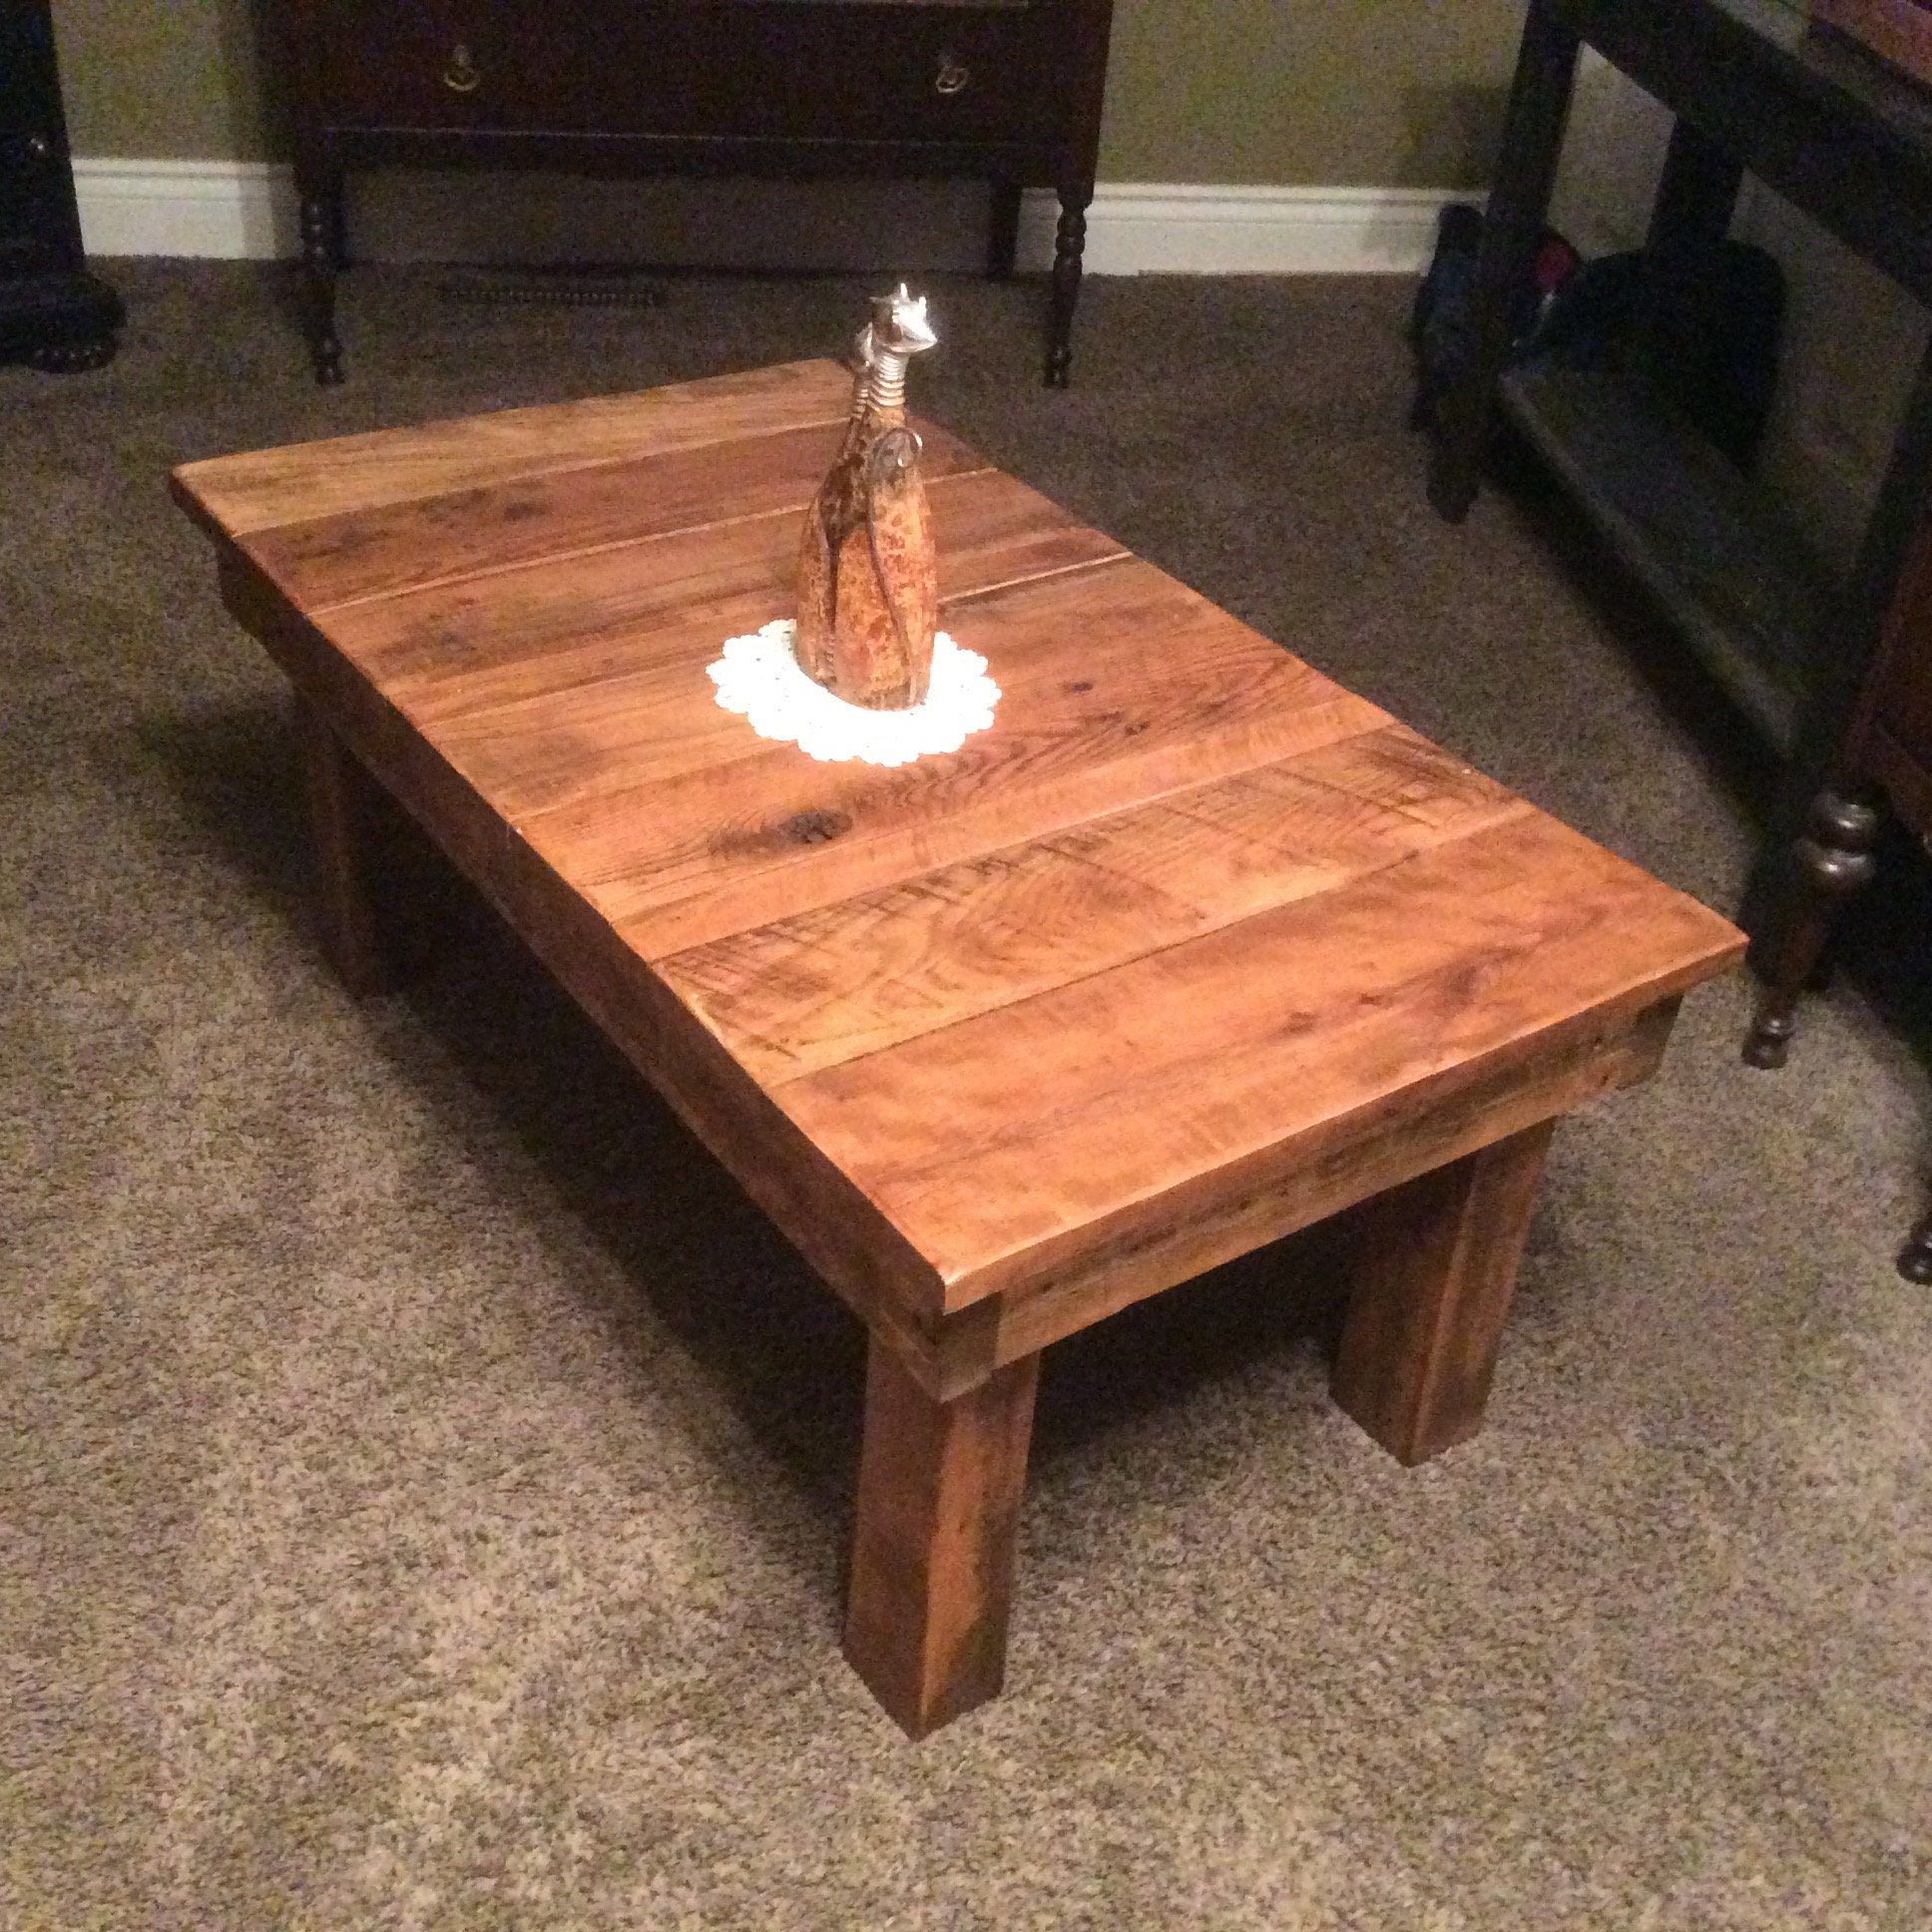 Reclaimed Wood Rustic Coffee Table Within Most Recent Barnwood Coffee Tables (View 5 of 20)